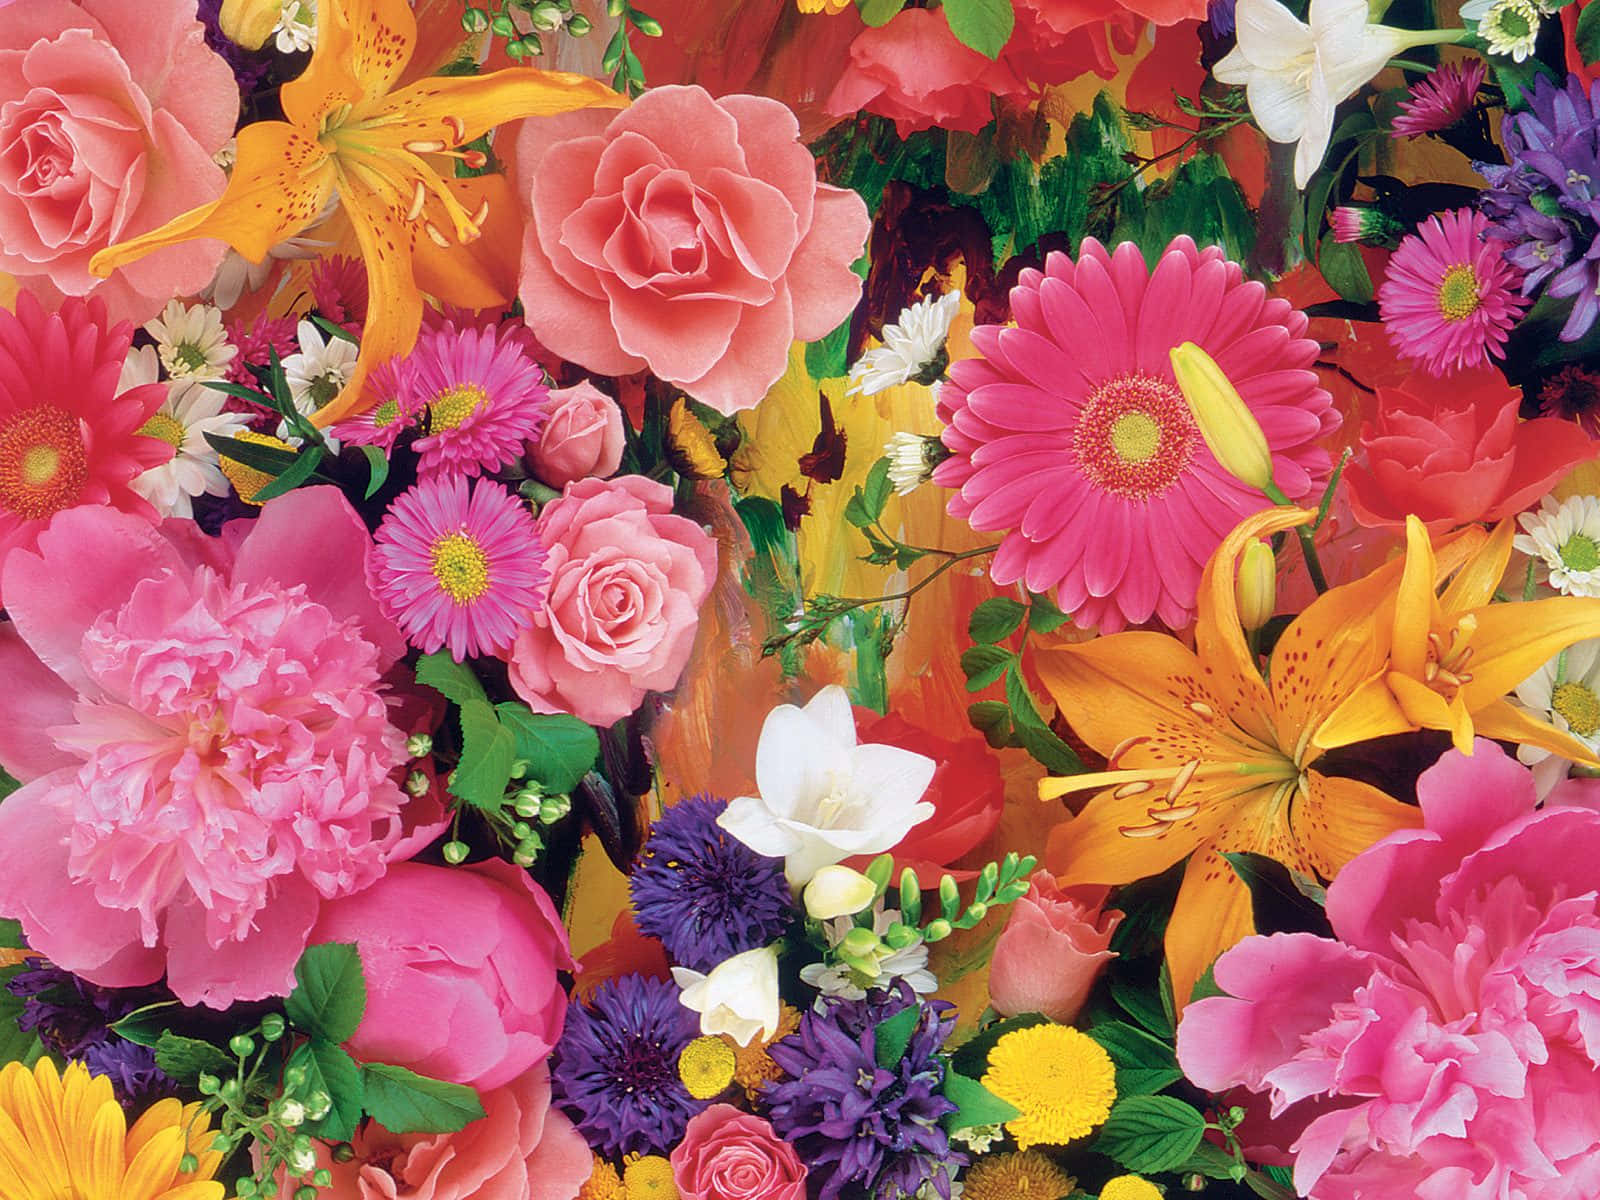 Caption: Vibrant Blooming Flowers in a Garden Wallpaper